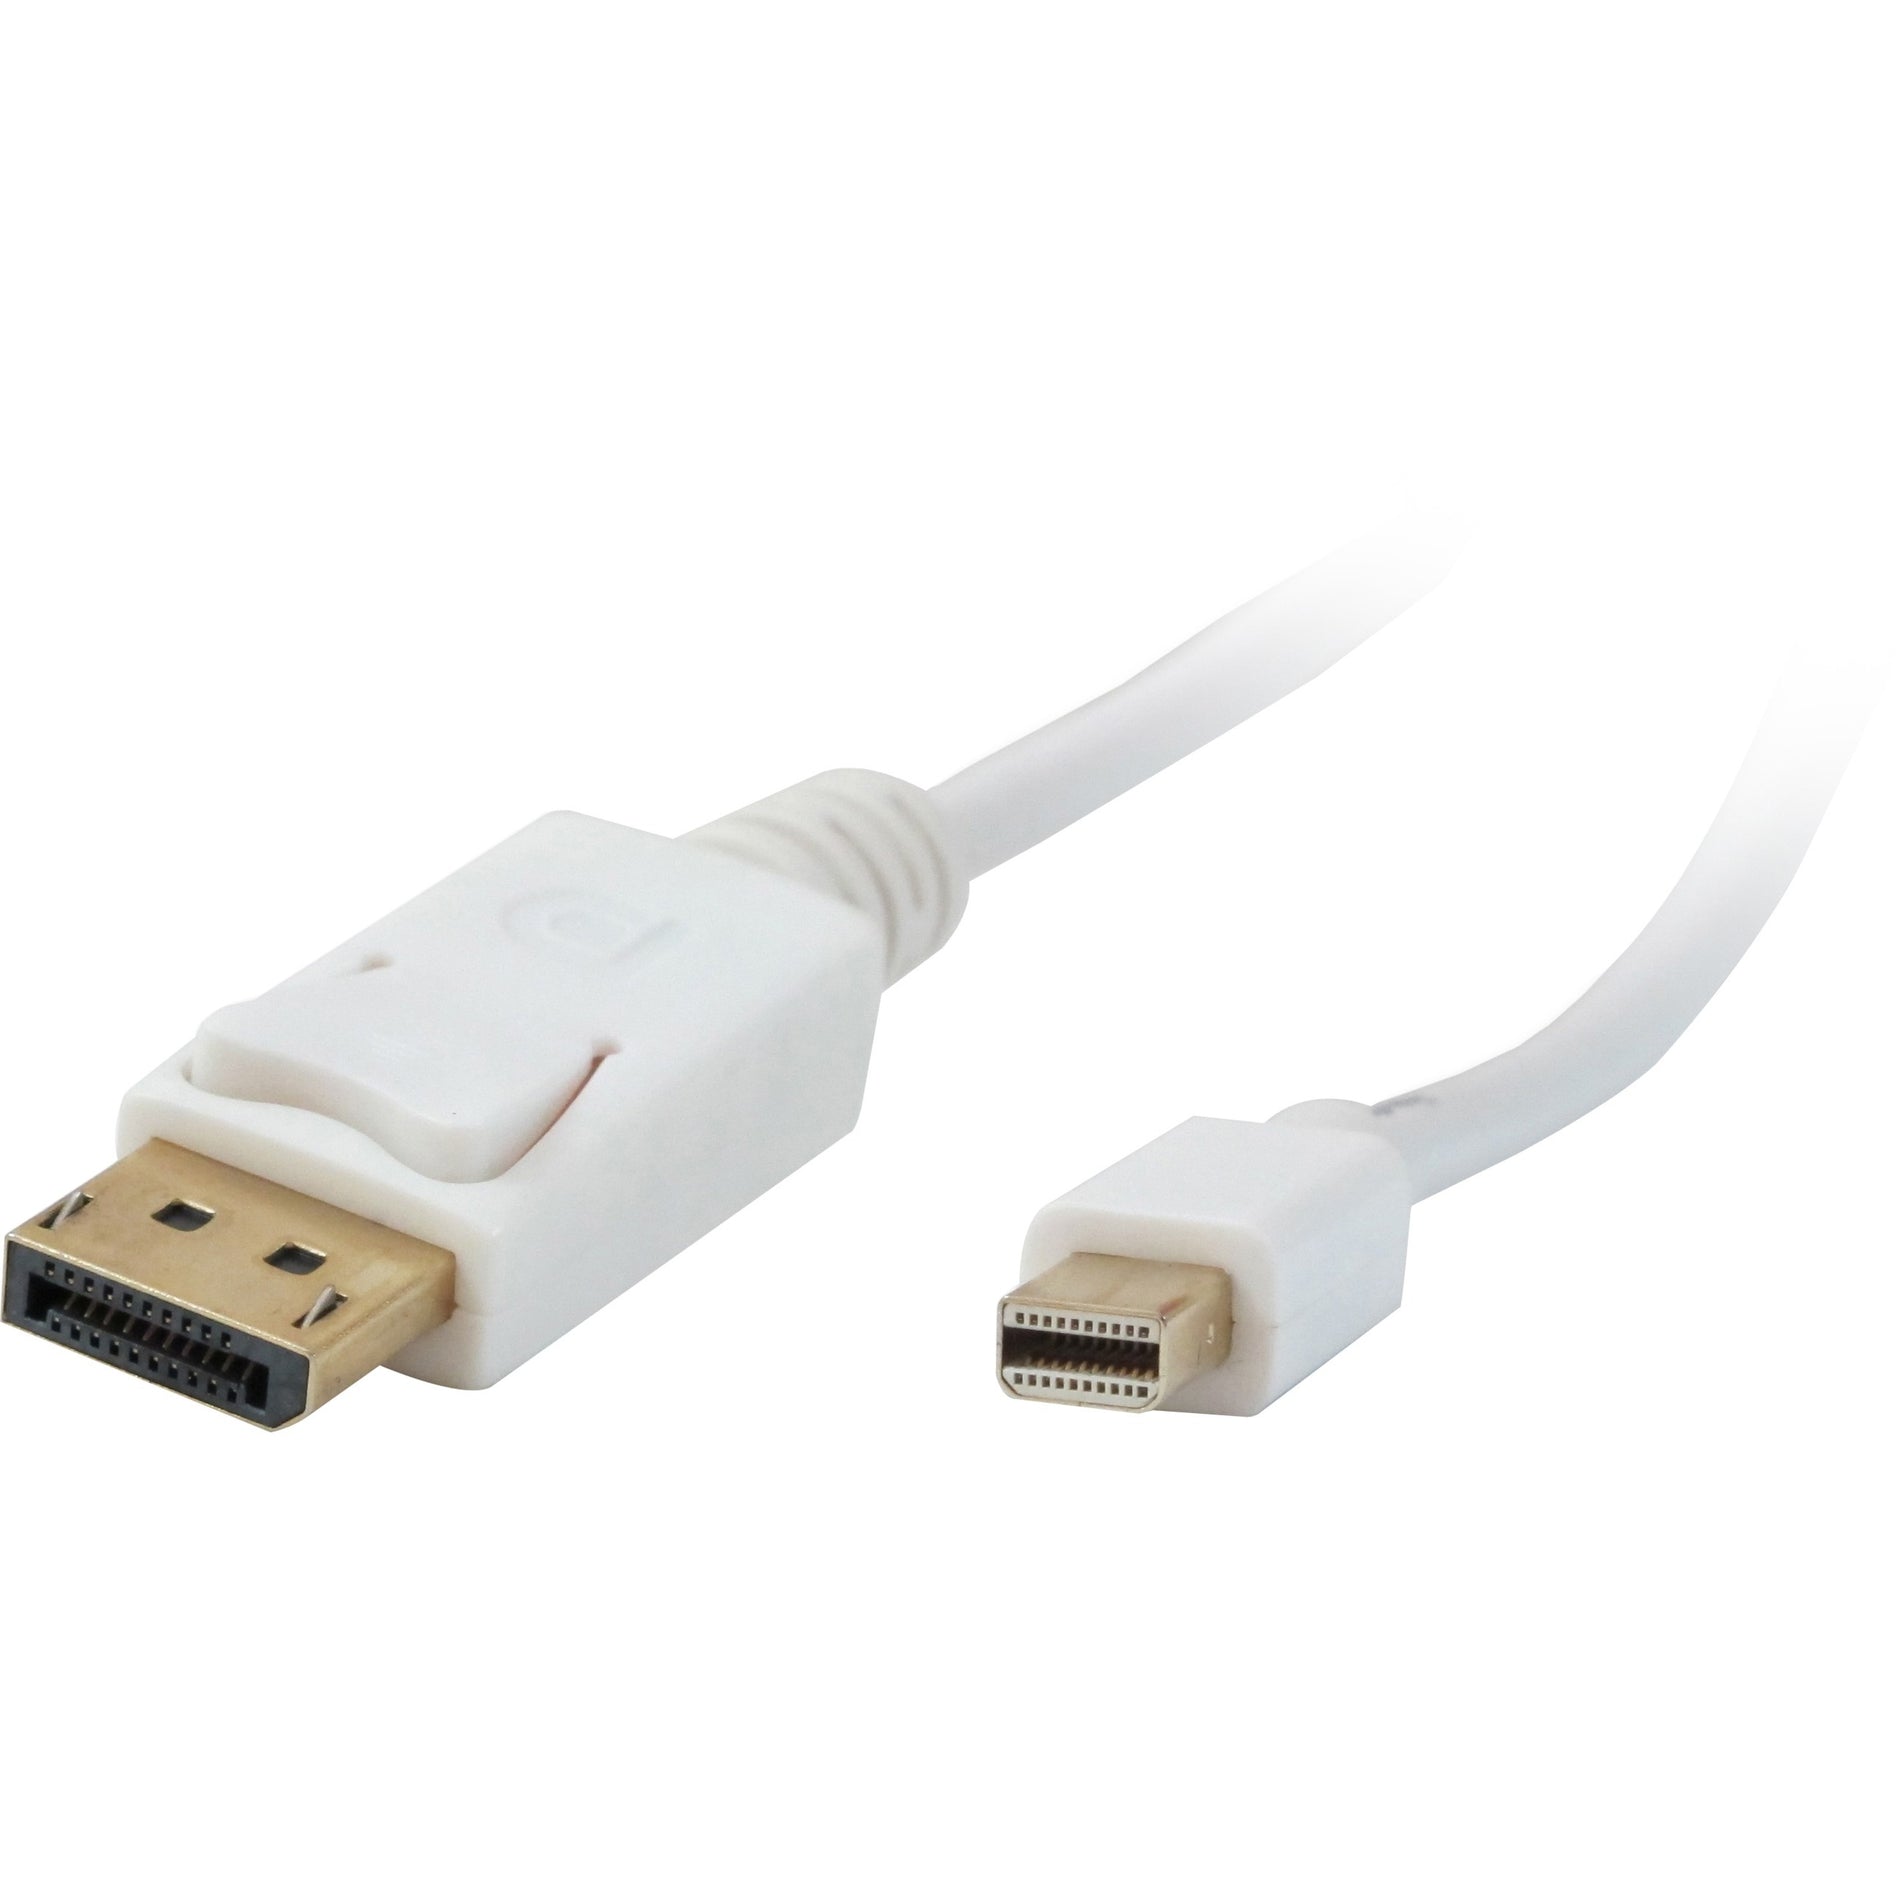 Comprehensive MDP-DISP-3ST Mini DisplayPort Male to DisplayPort Male Cable 3ft, High-Speed Data Transfer, Lifetime Warranty